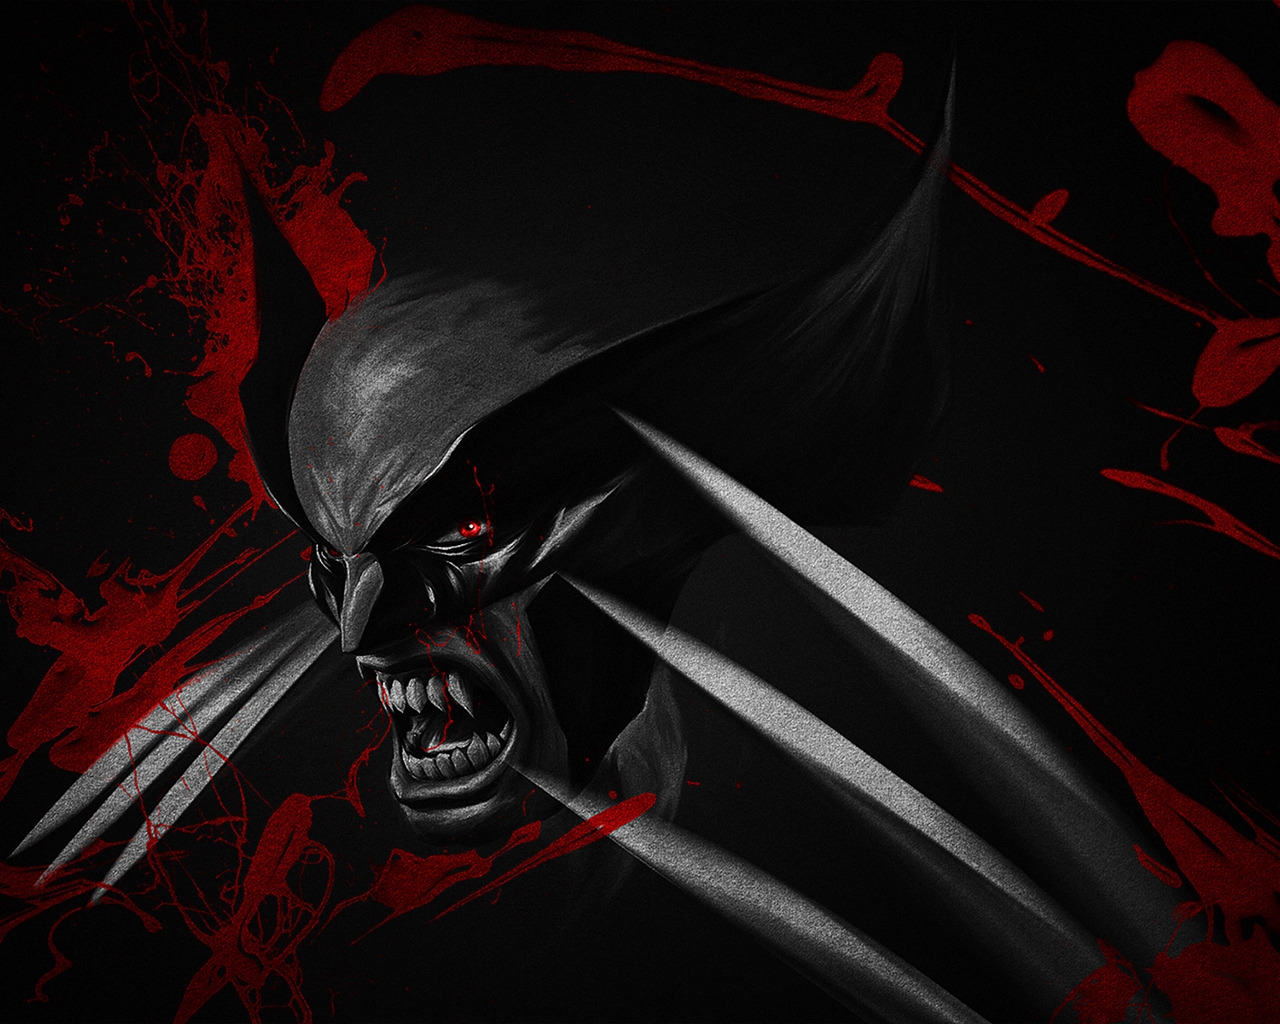 Black and Red Wolverine for 1280 x 1024 resolution